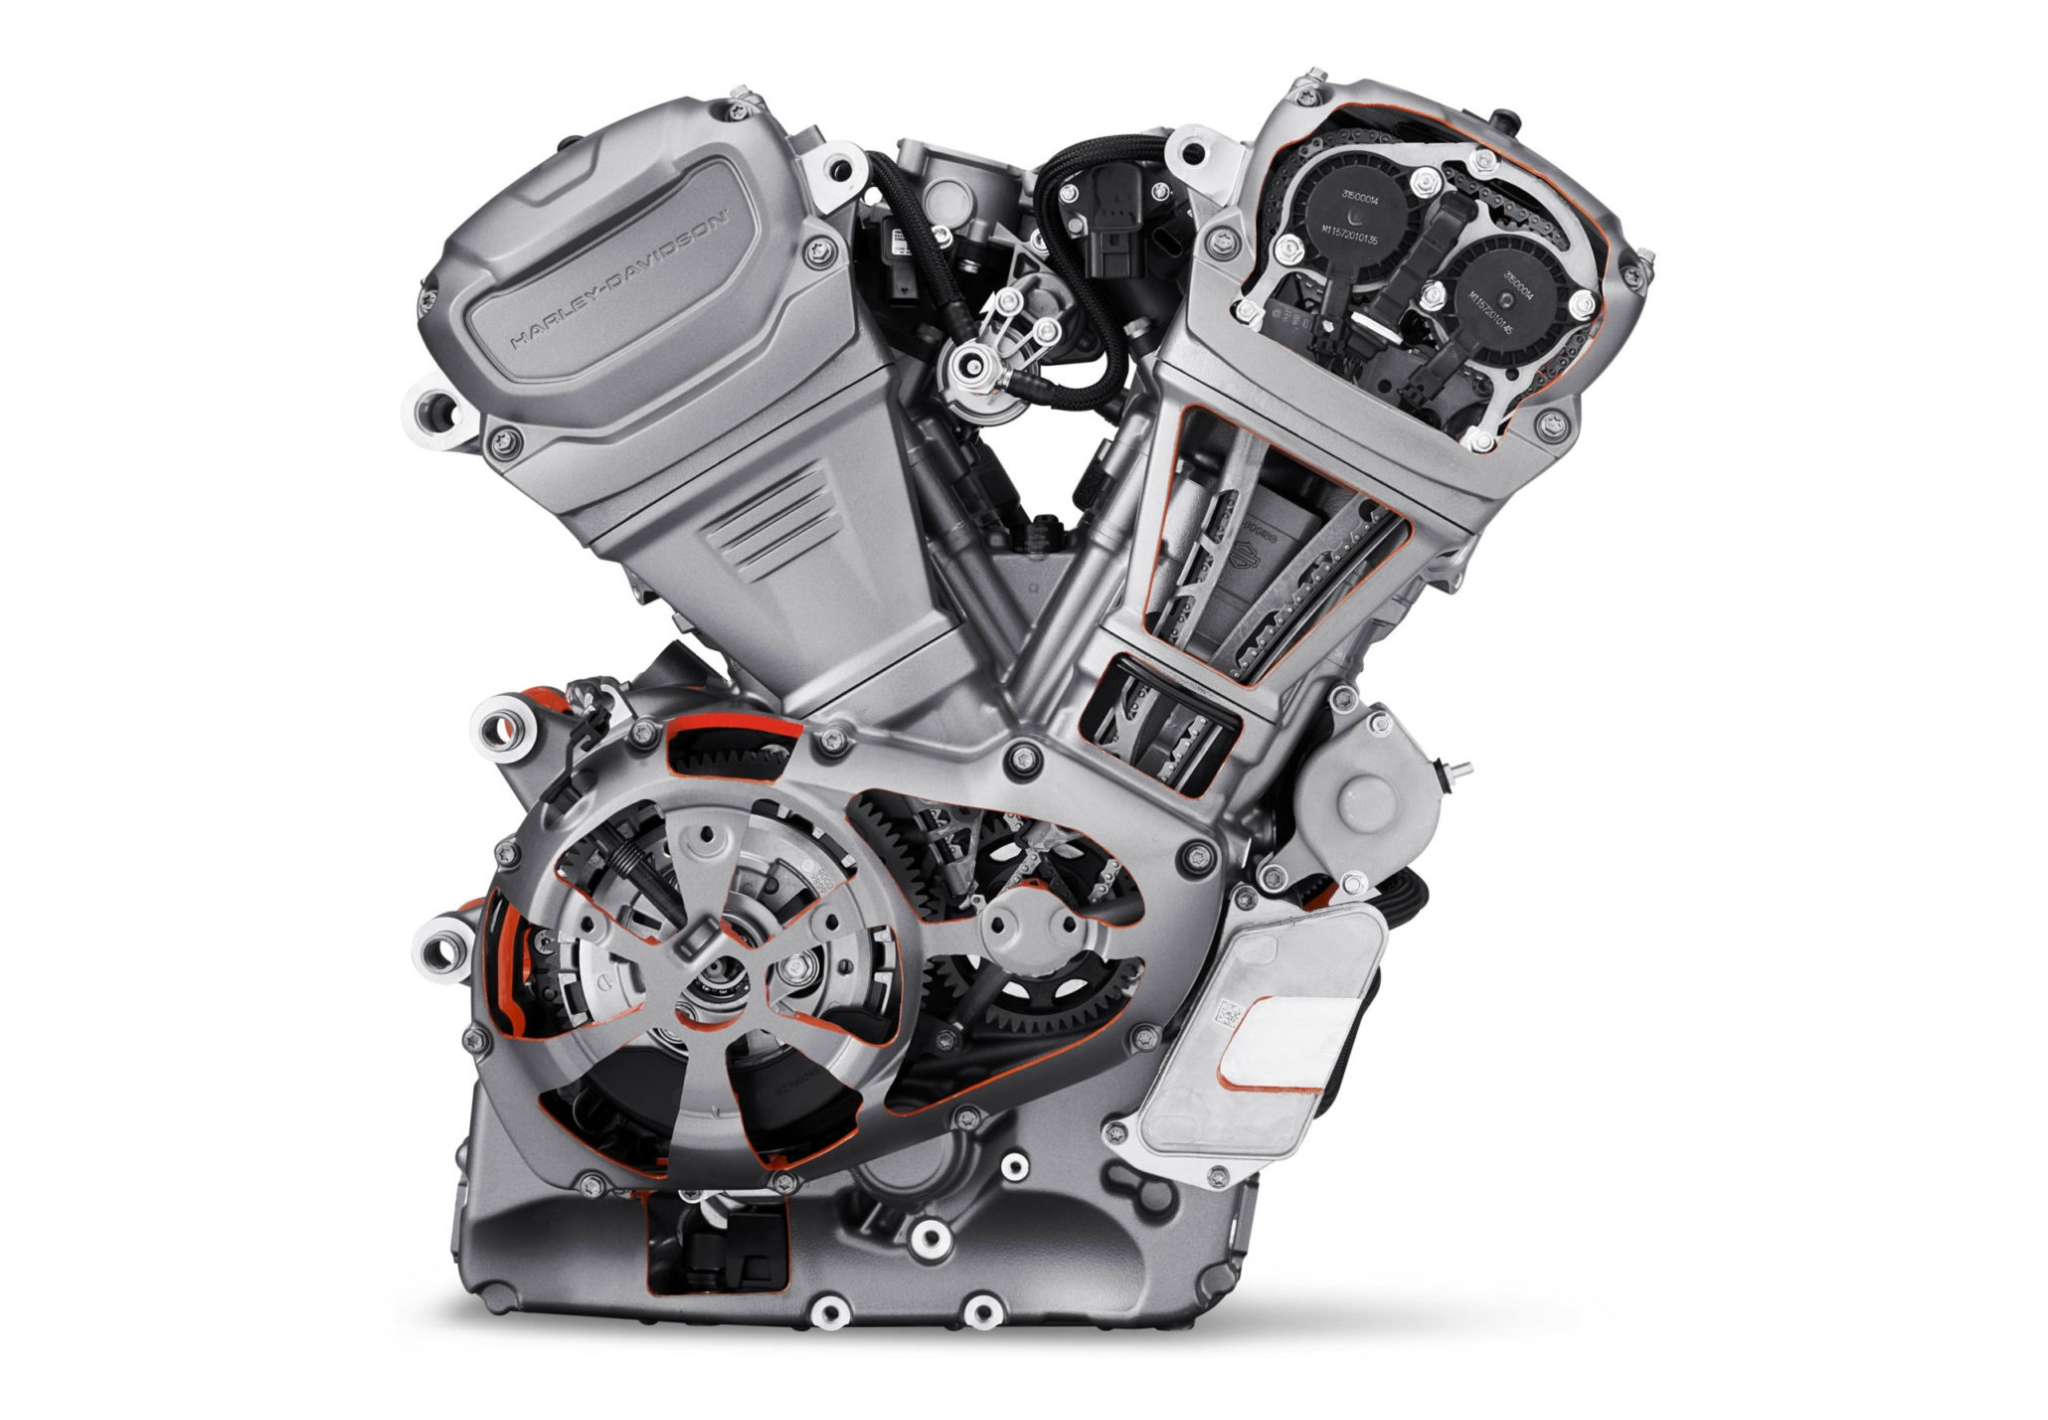 The Pan America 1250 is equipped with a liquid-cooled, 1,250cc V-twin engine